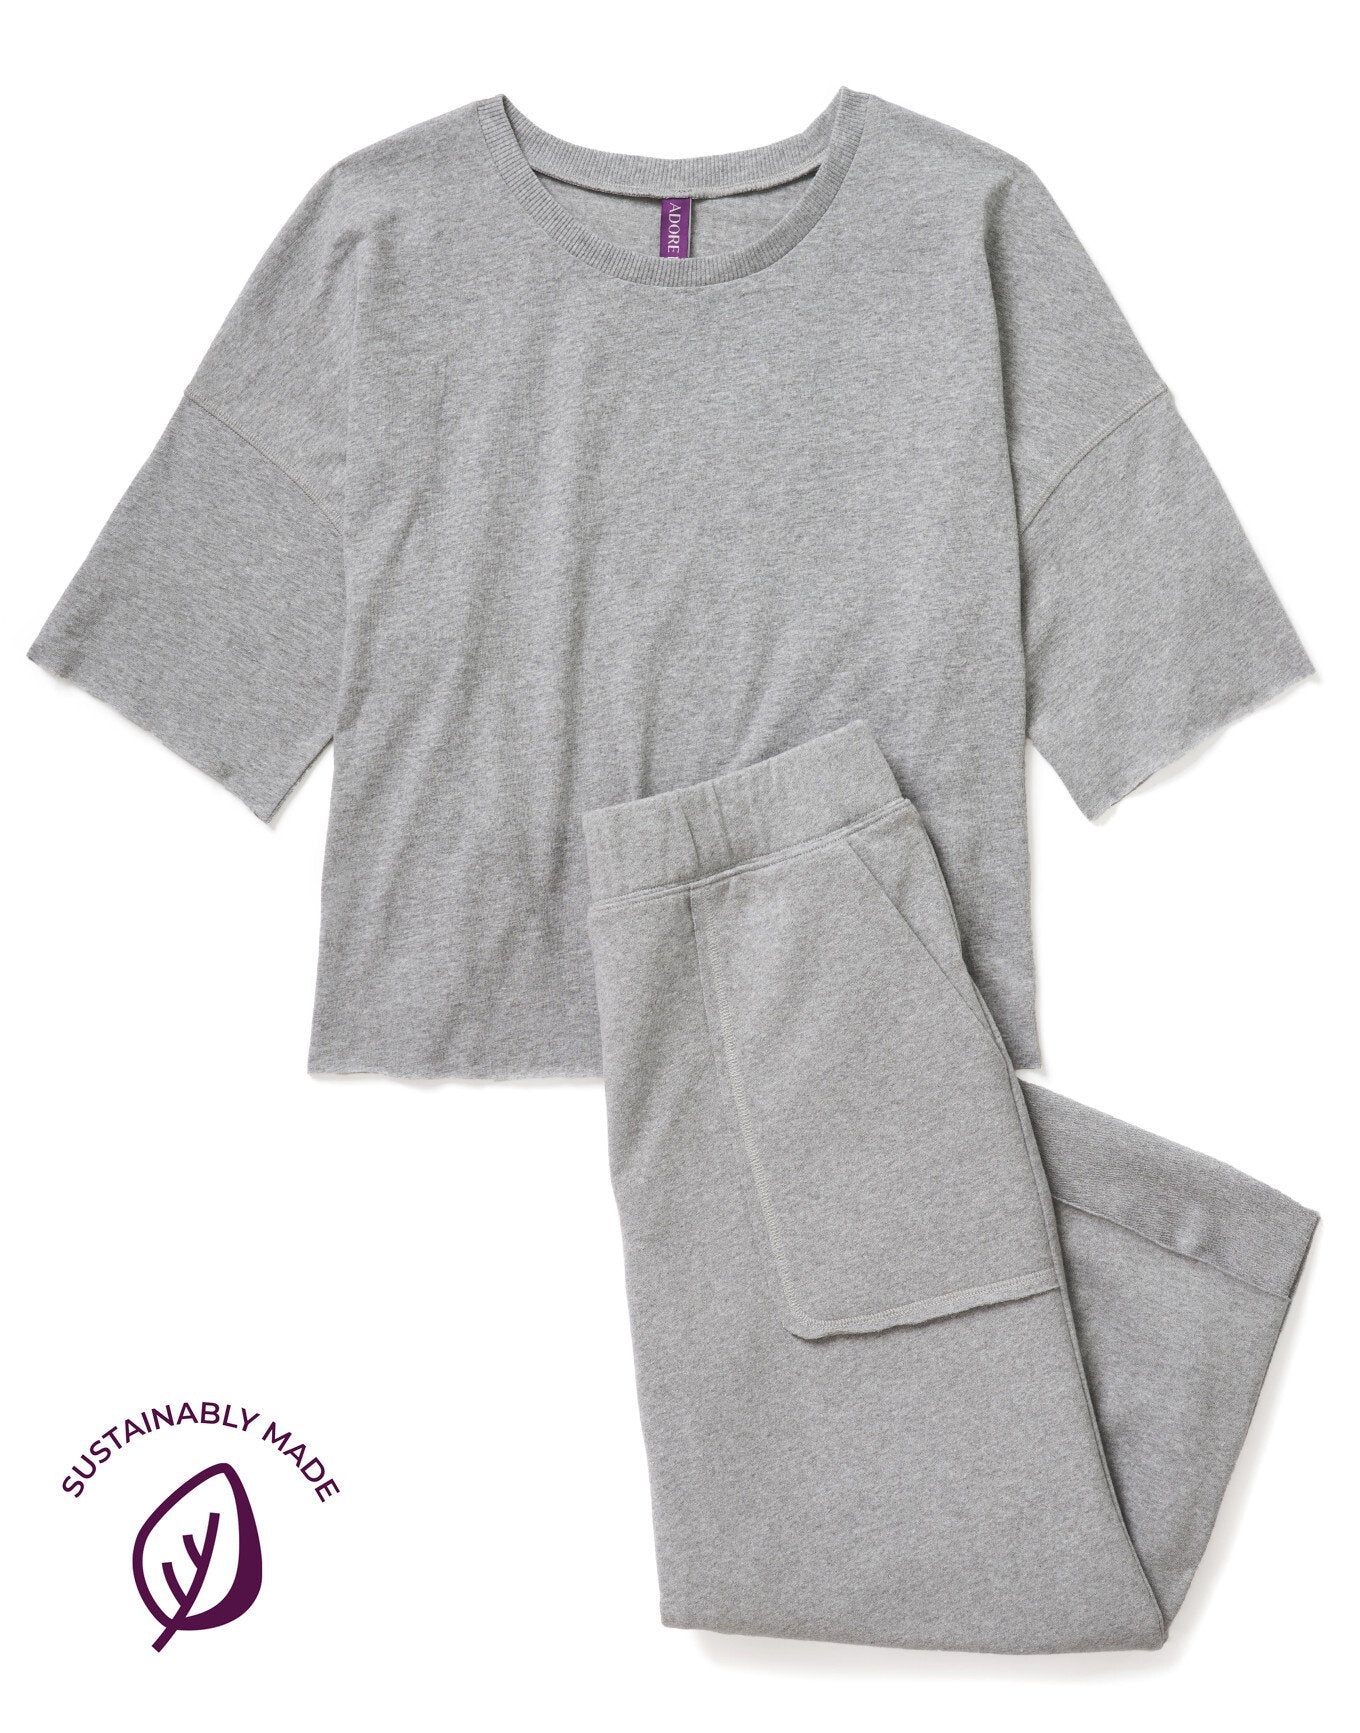 Adore Me Avery T-Shirt & Sweatpant Set in color Light Heather Gray and shape pj